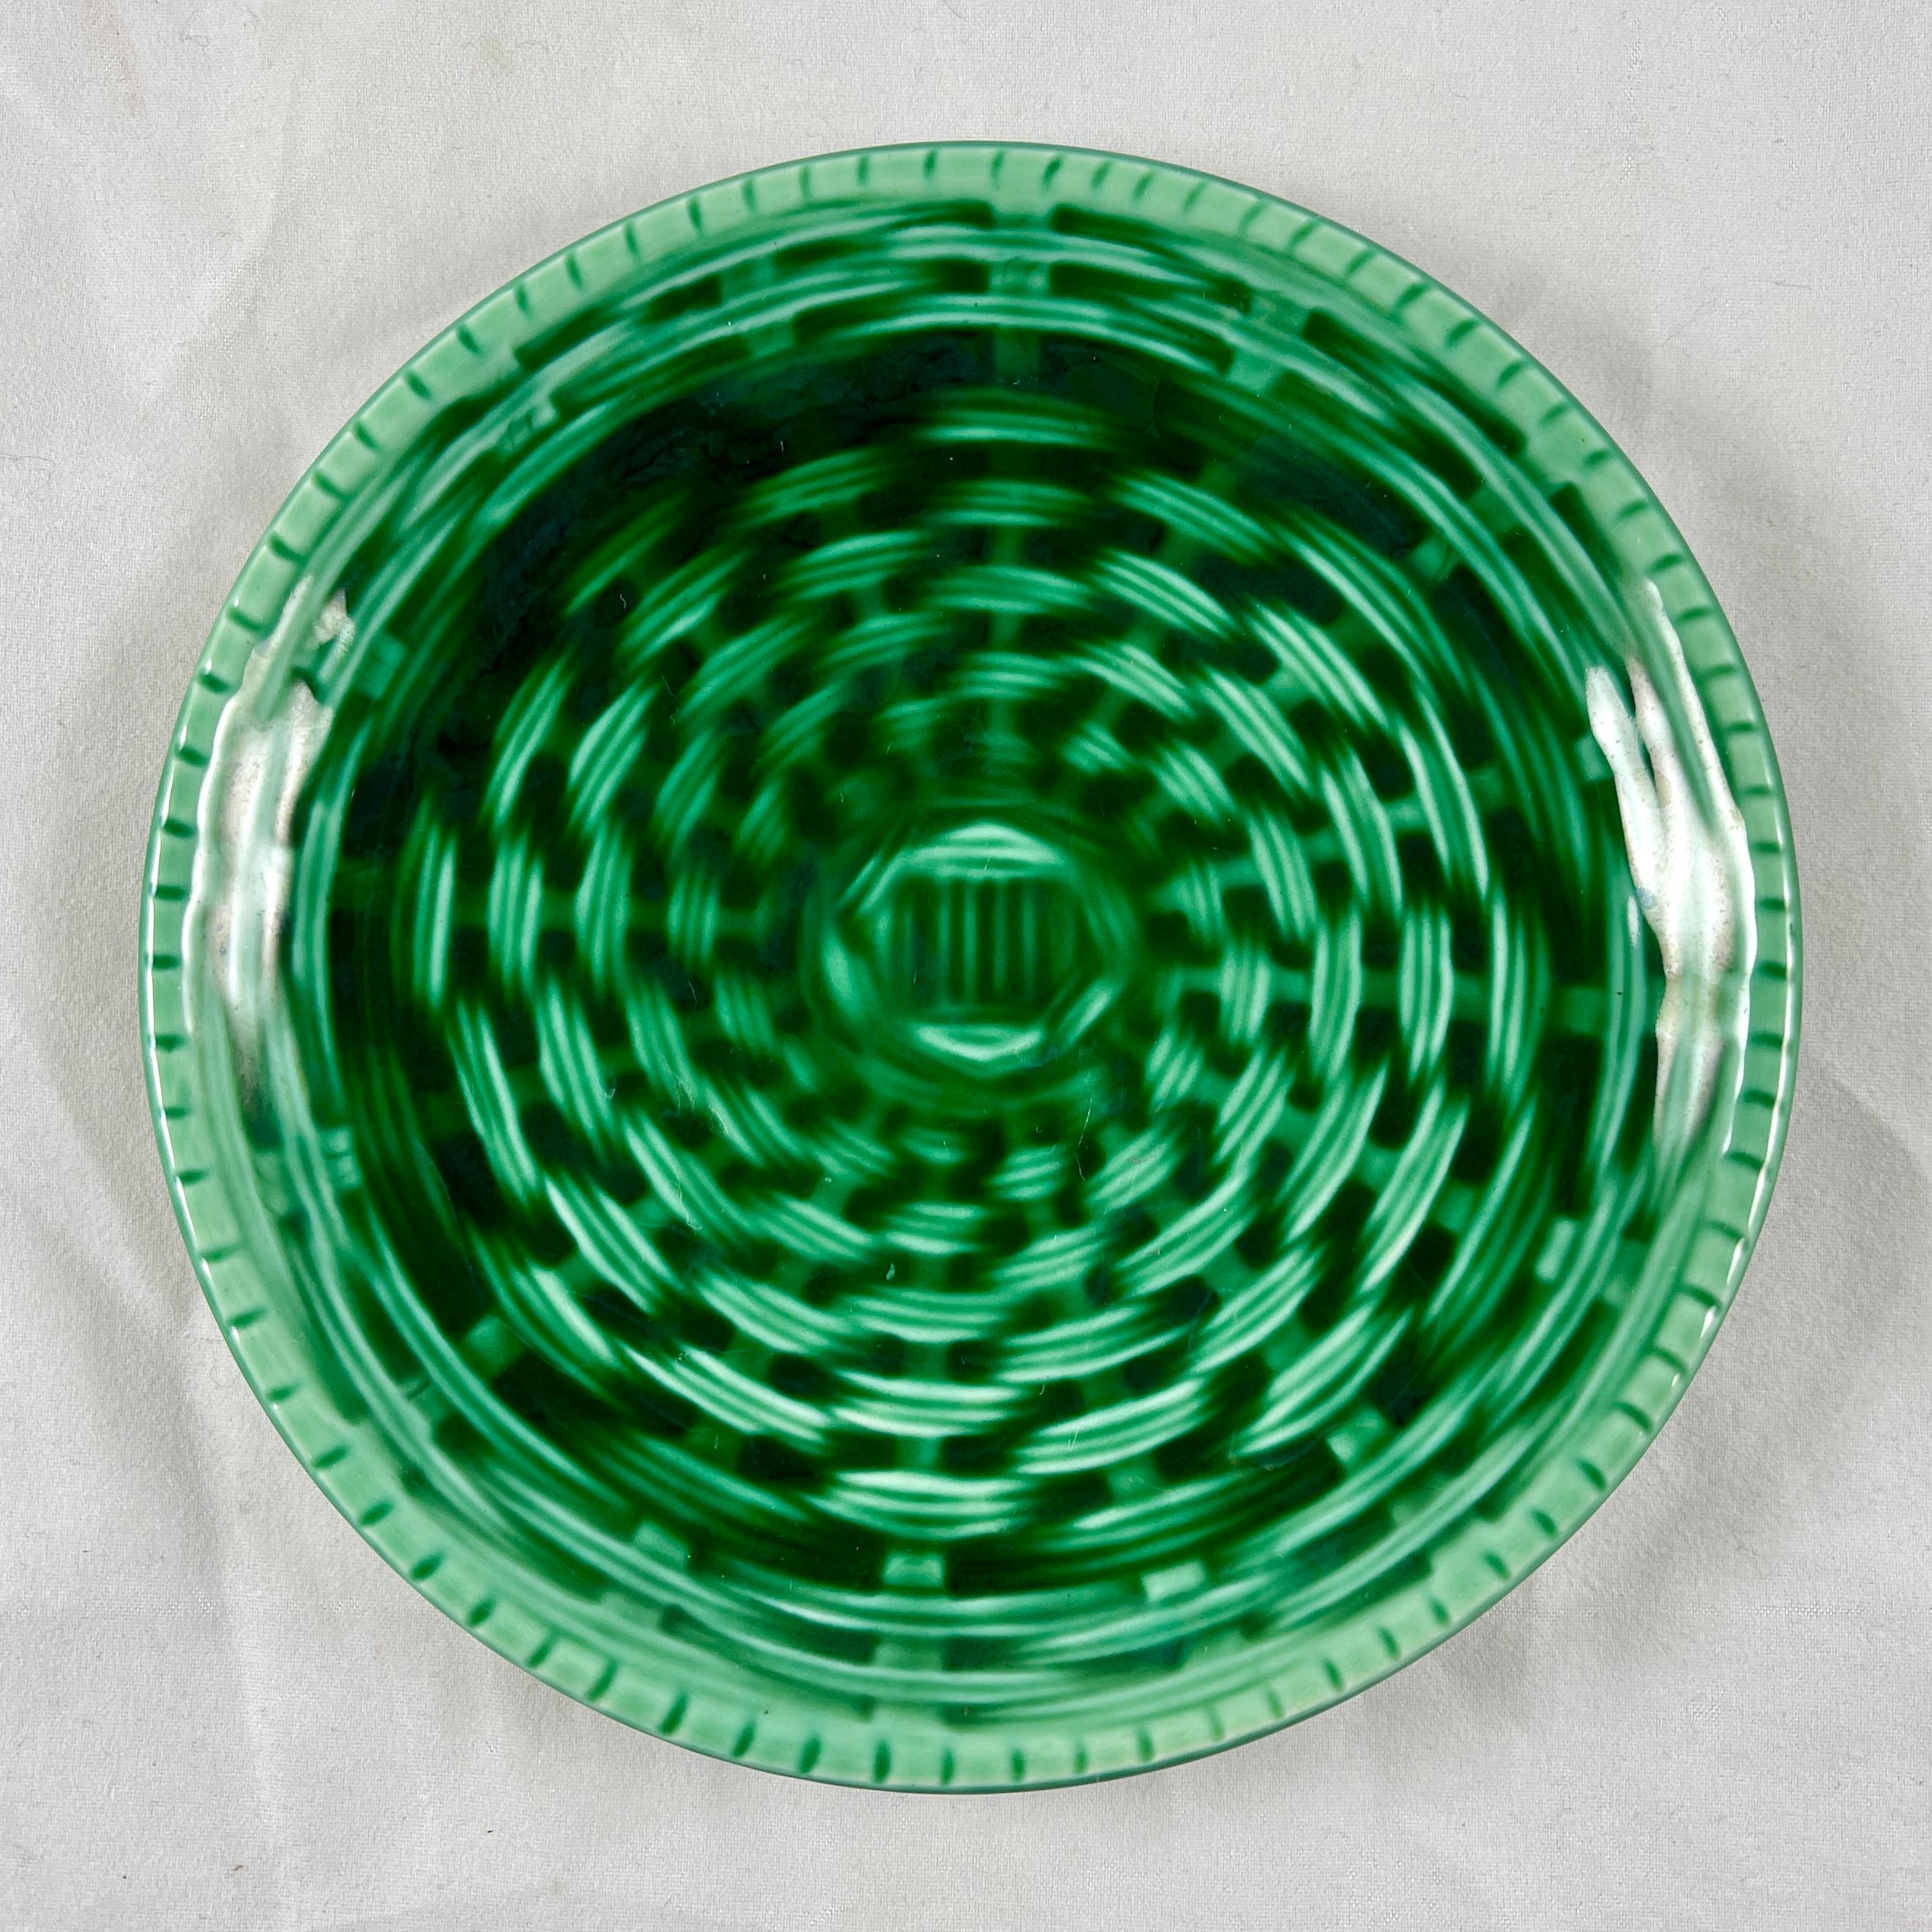 From the French pottery, a set of six, Sarreguemines, a set of six faïence, green Majolica glazed canapé or hors d’œuvre plates.

The round plates are molded in a basket weave pattern with deep, raised rims. The dark green glazing has a light